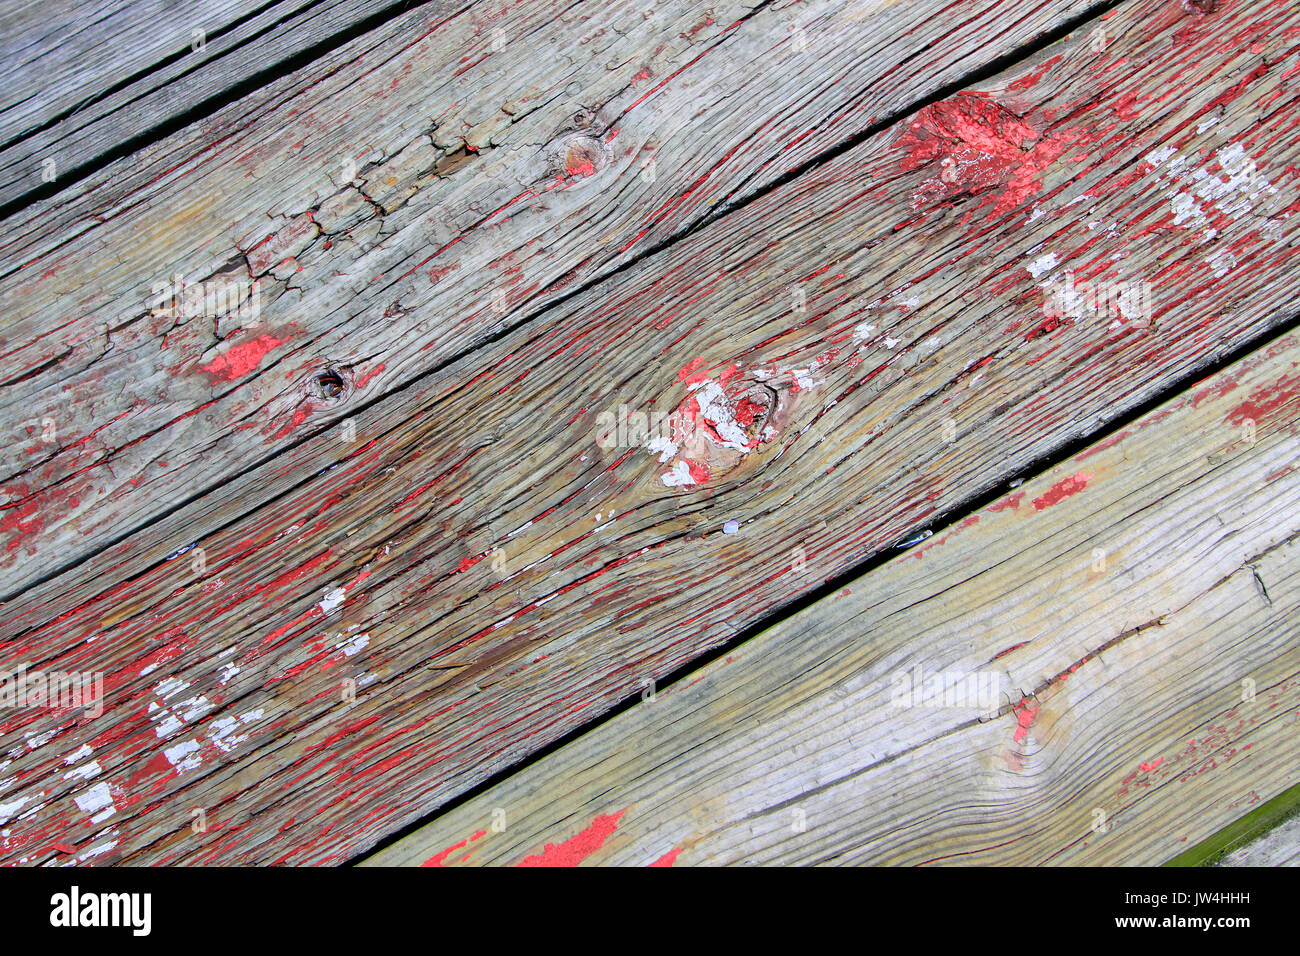 weathered wooden decking Stock Photo